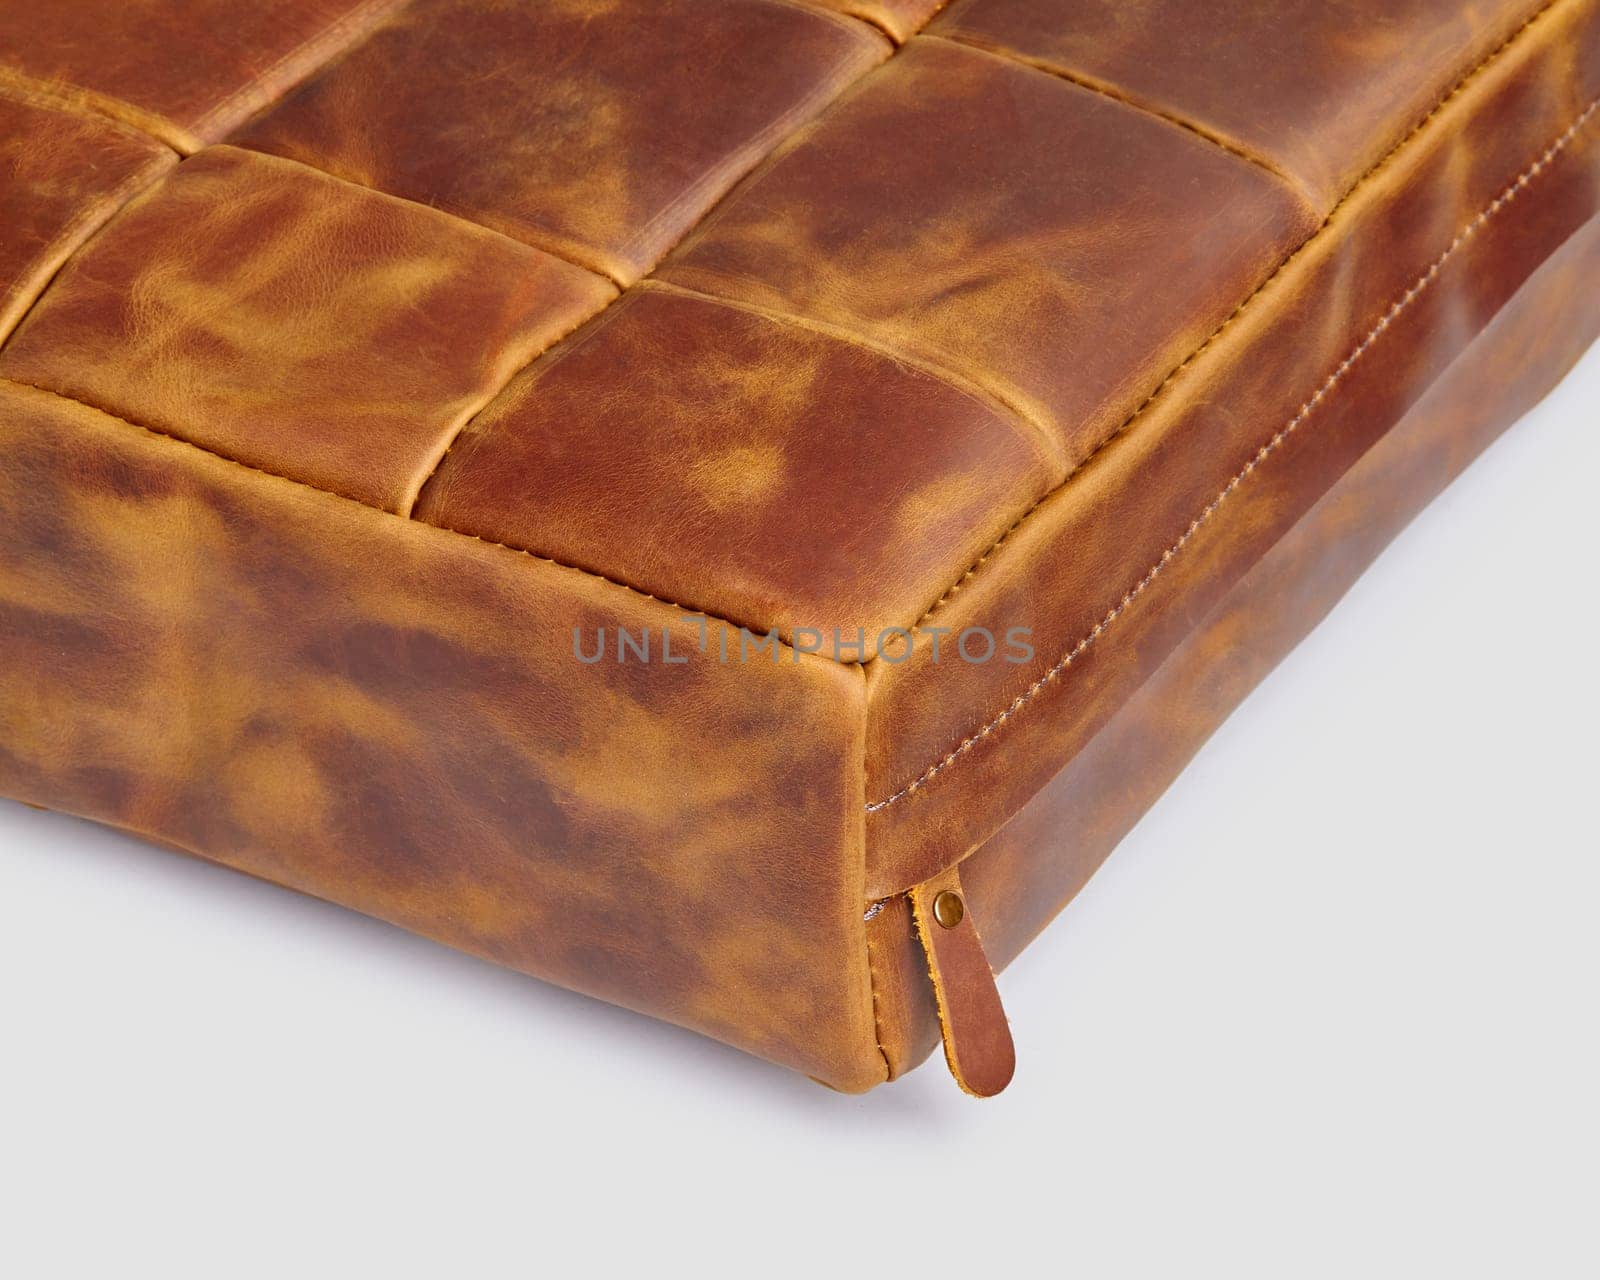 Closeup of seat cushion made of brown leather patches with hook-and-loop fastener by nazarovsergey